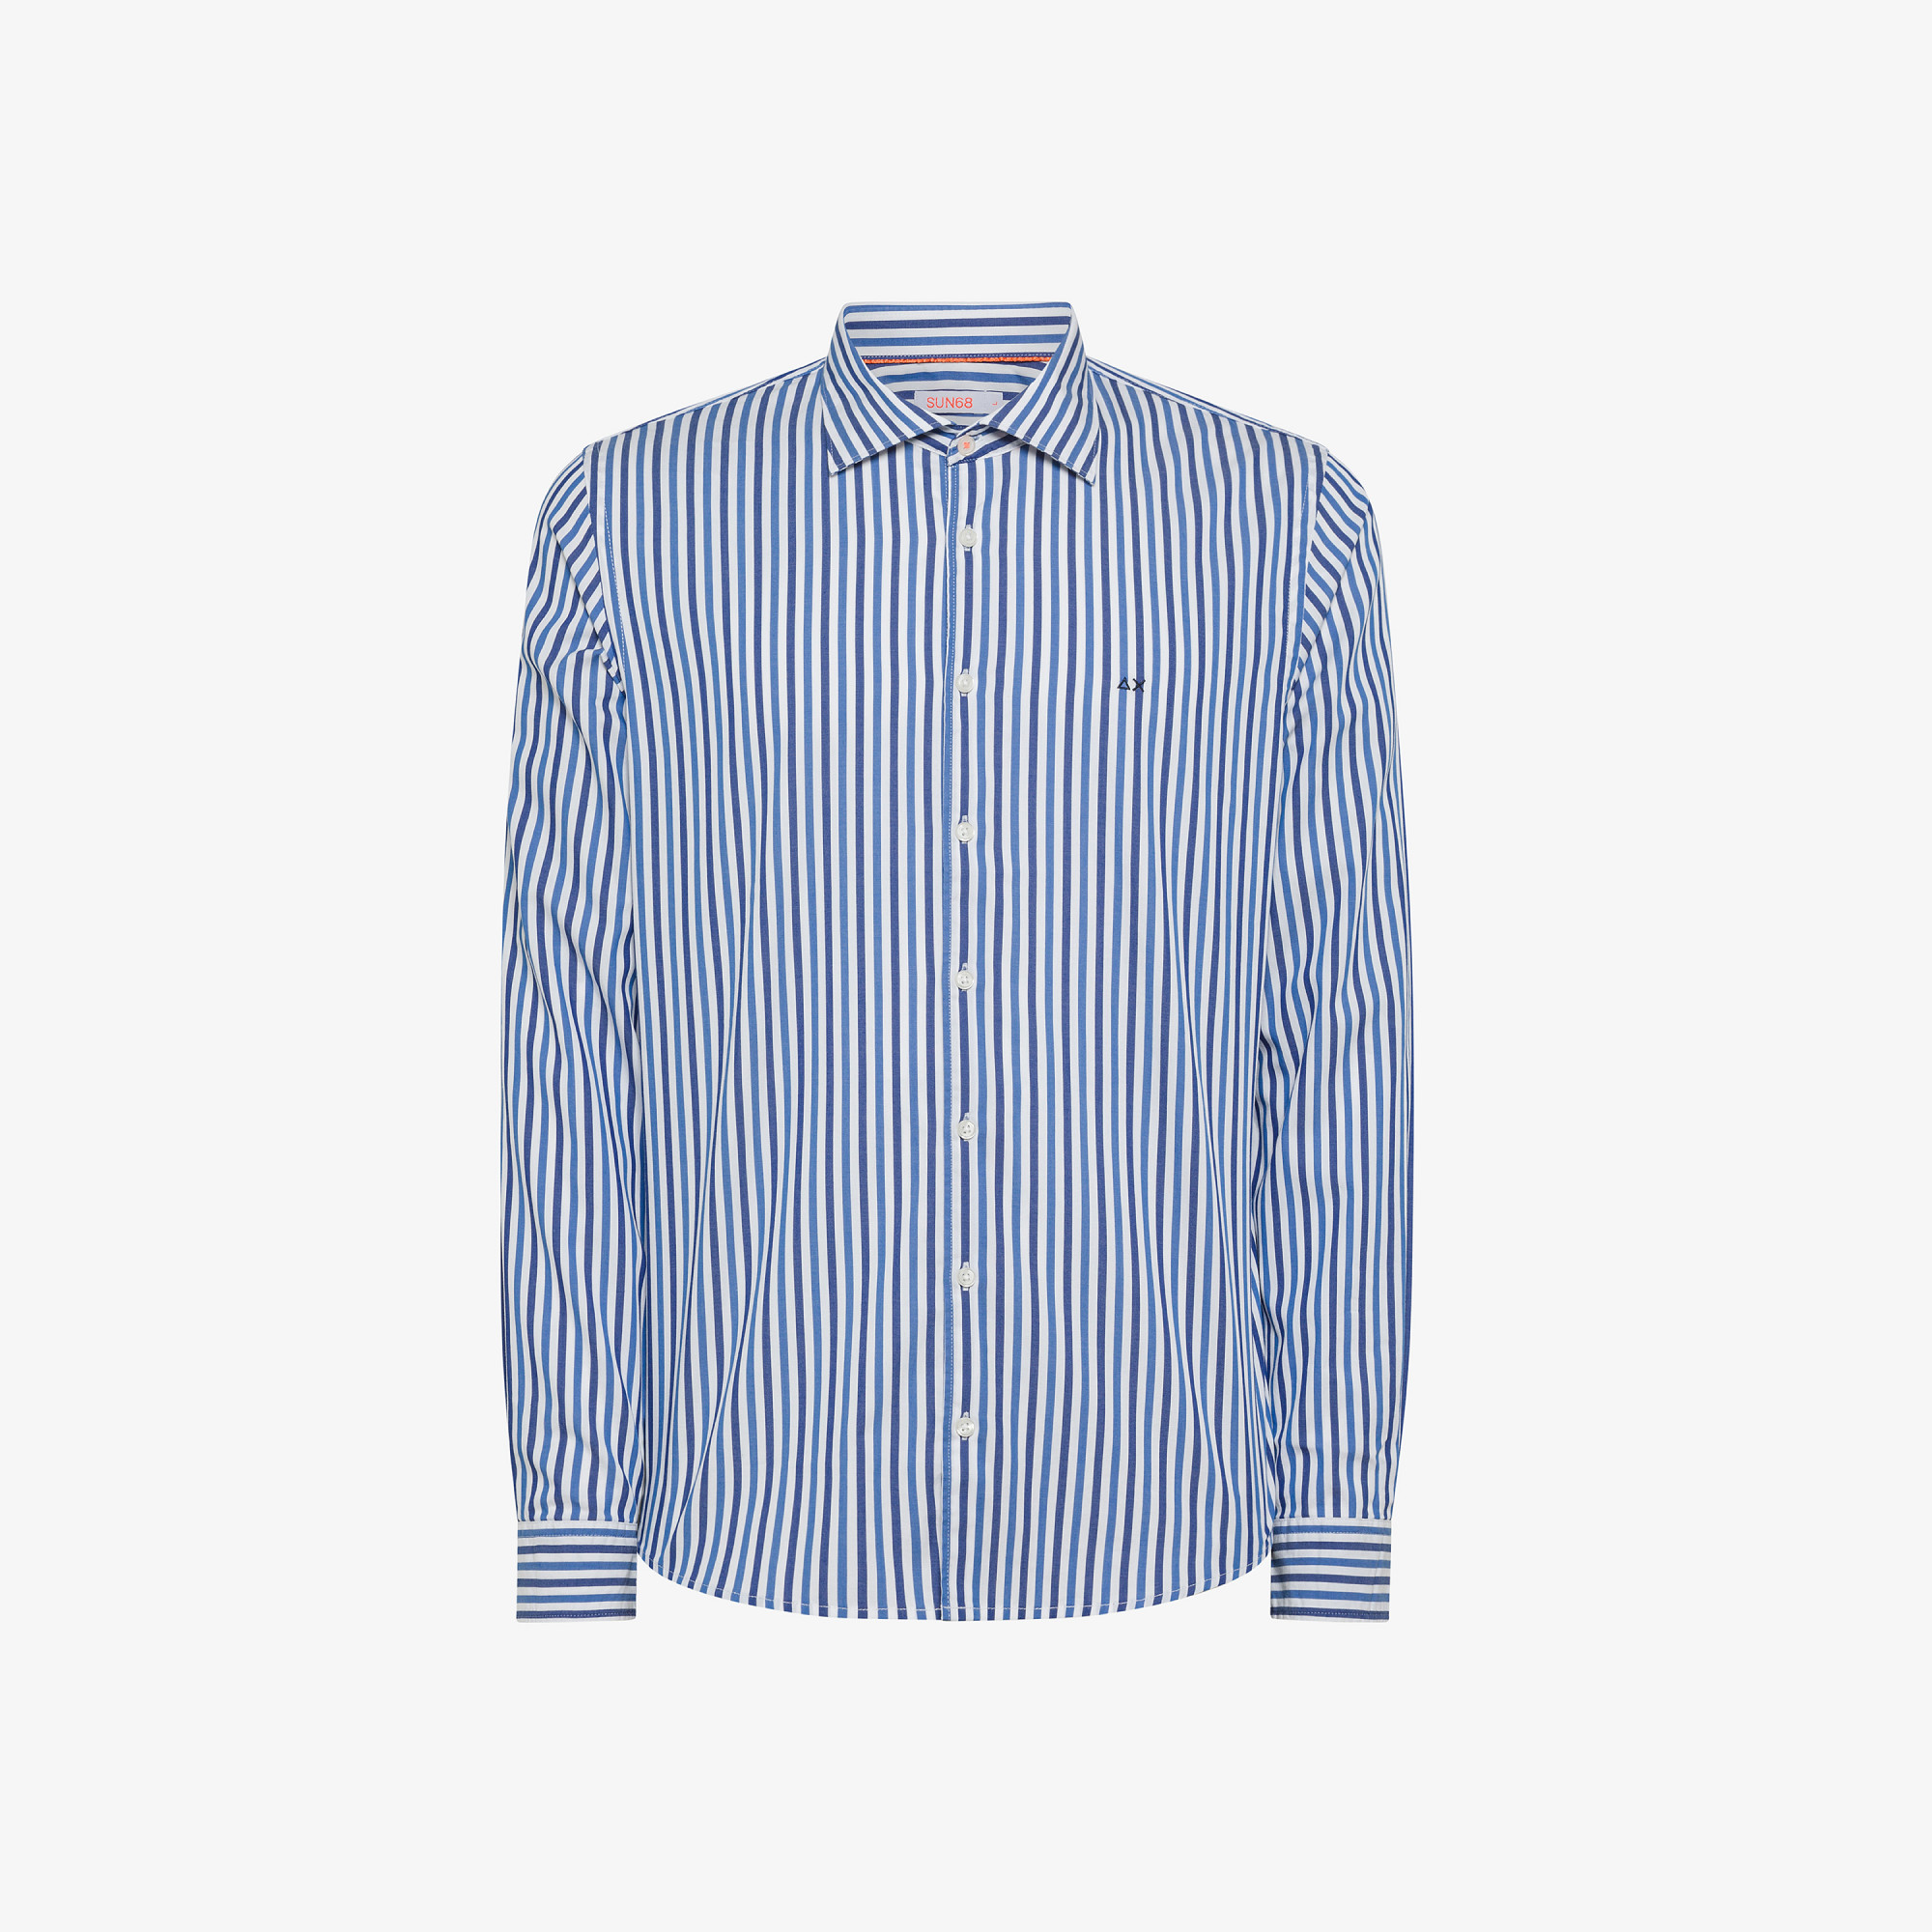 SHIRT CLASSIC STRIPE WITH FLUO DETAIL L/S NAVY BLUE/ROYAL